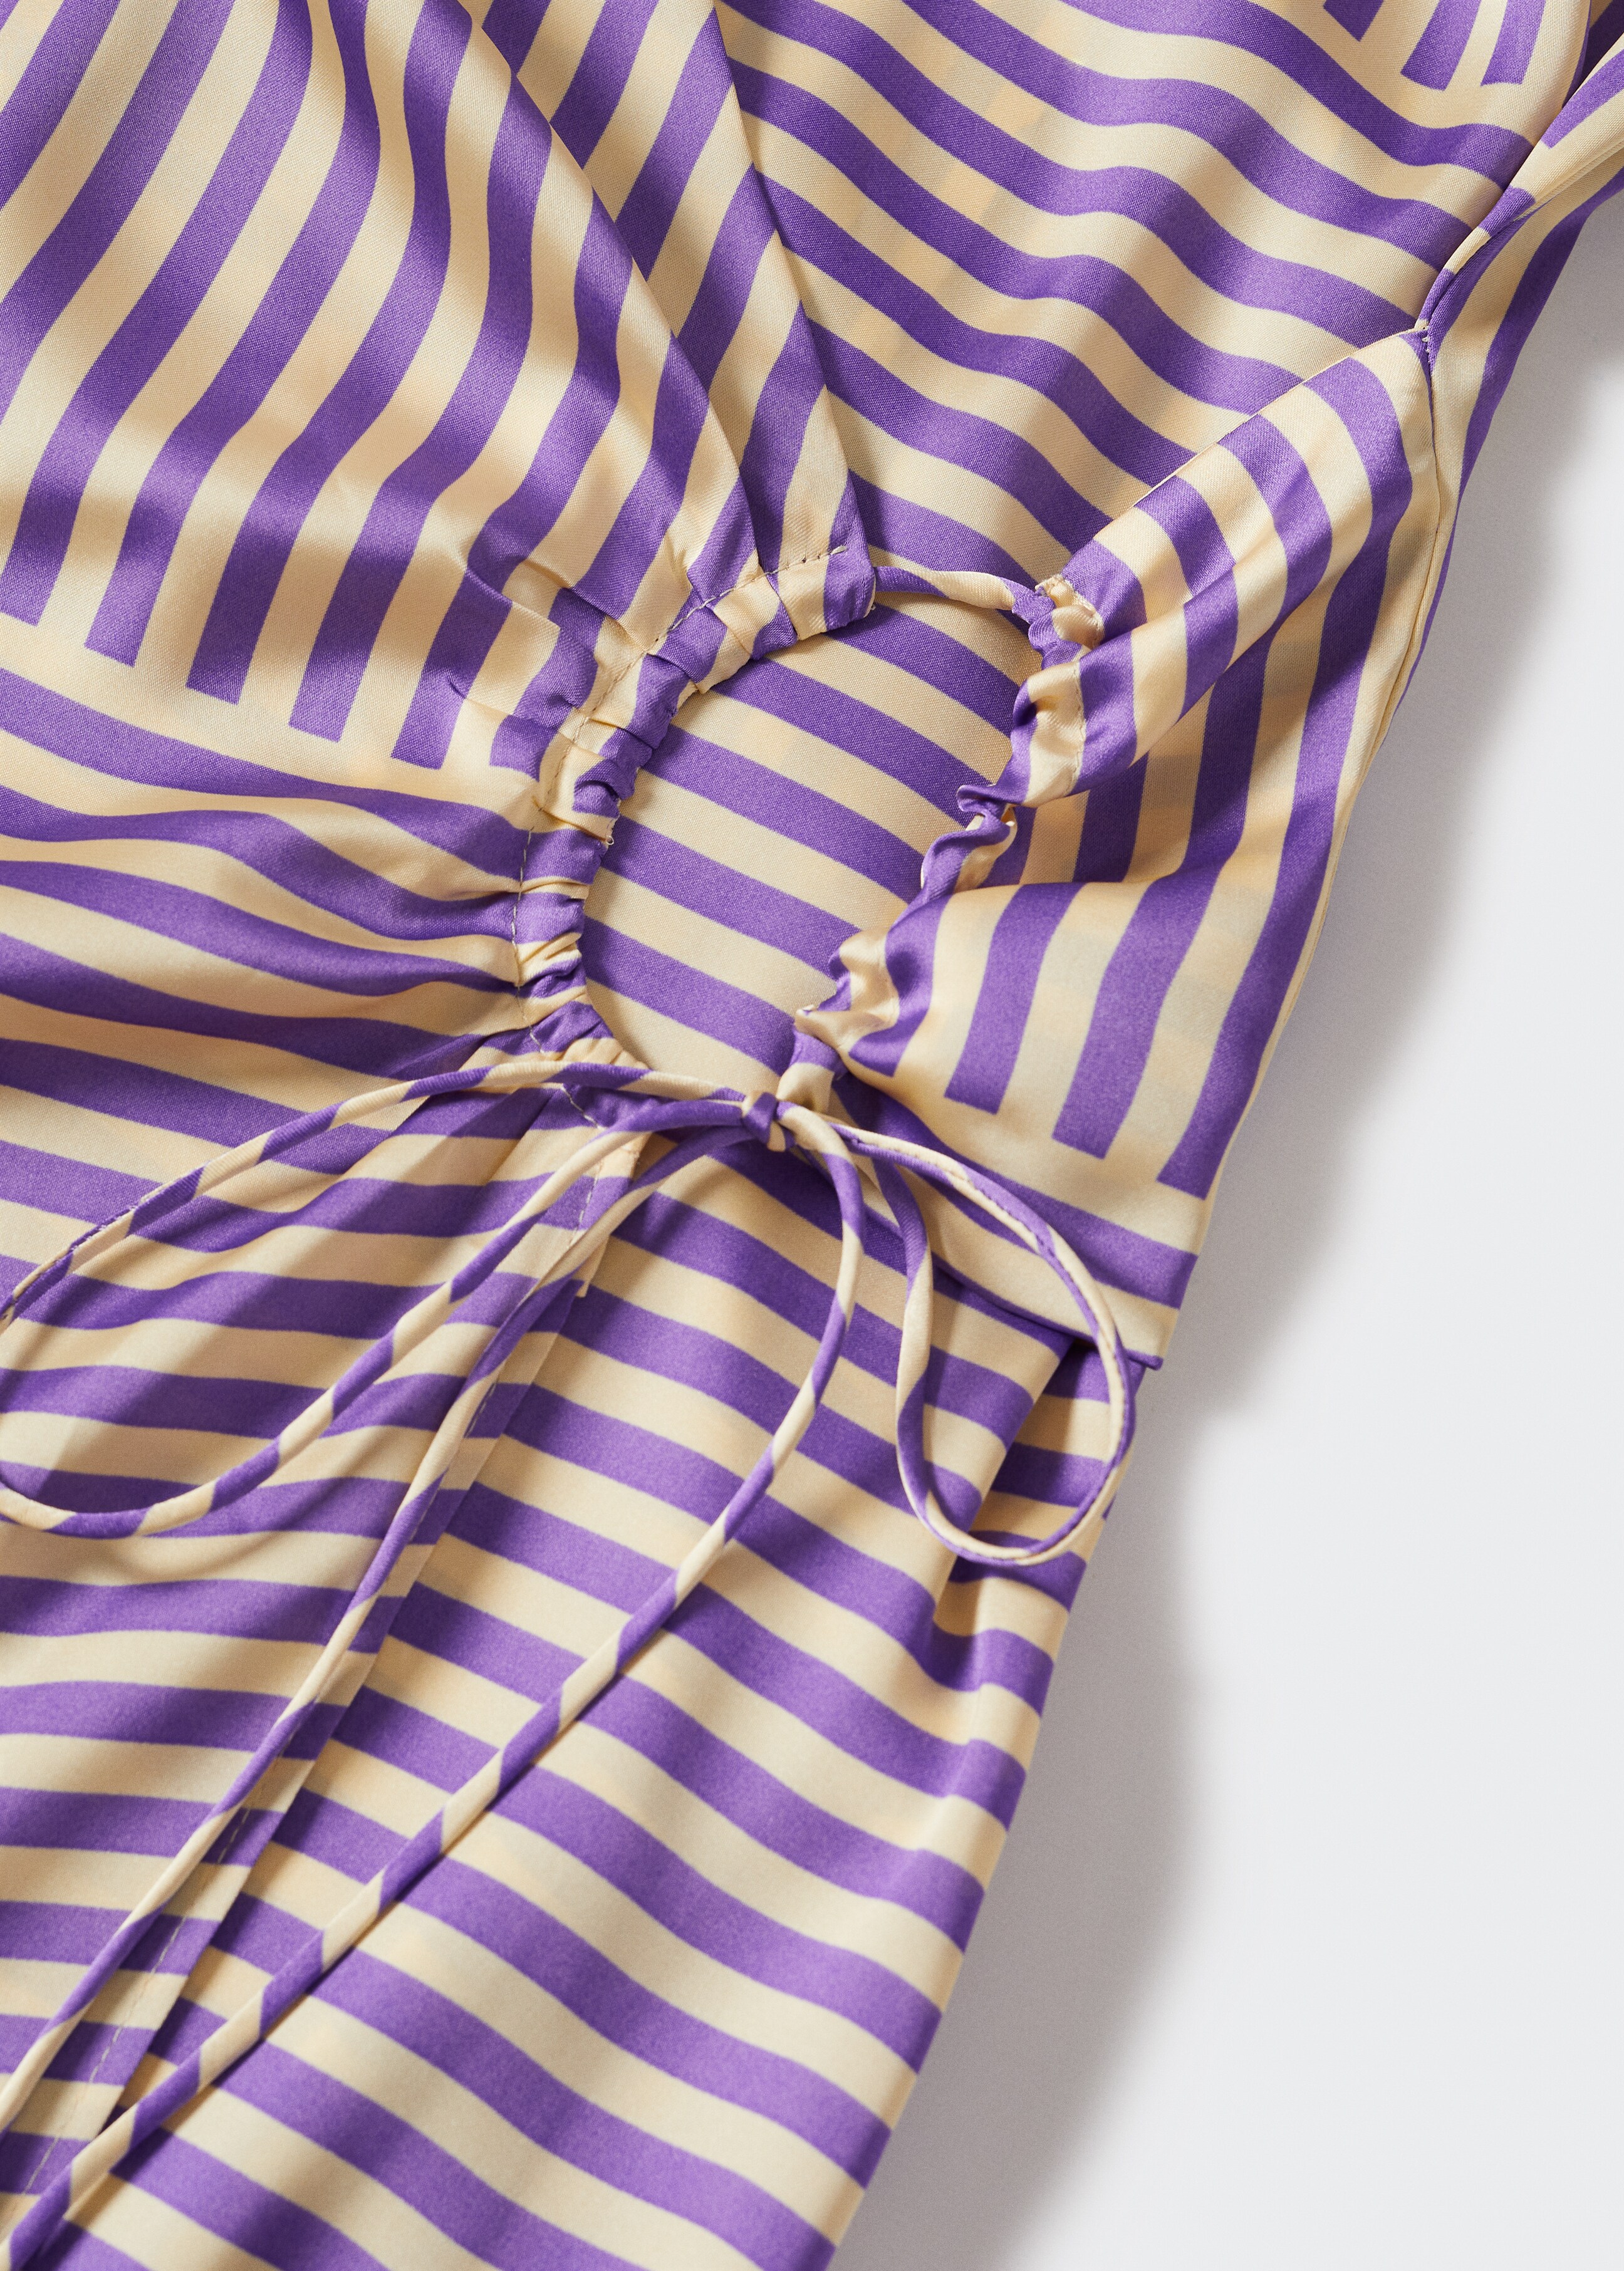 Striped satin dress - Details of the article 8